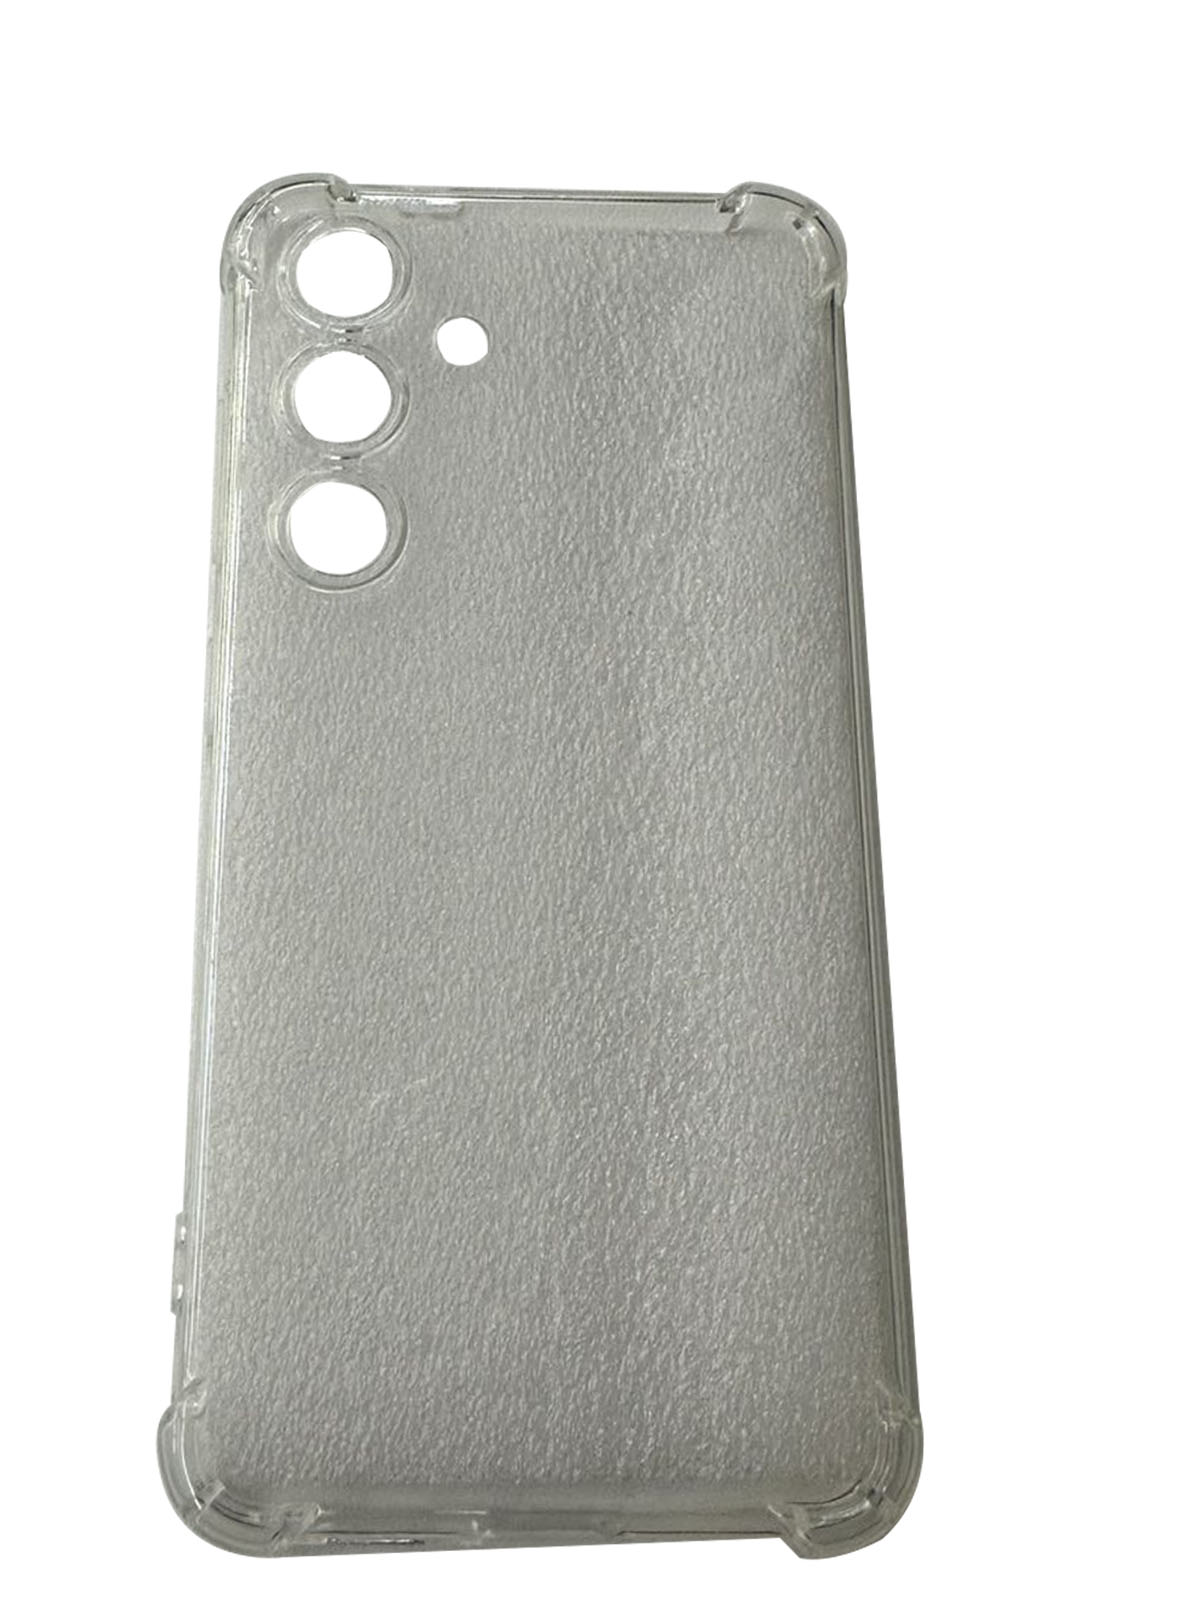 Galaxy S24 ultra Tpu Clear Protective case